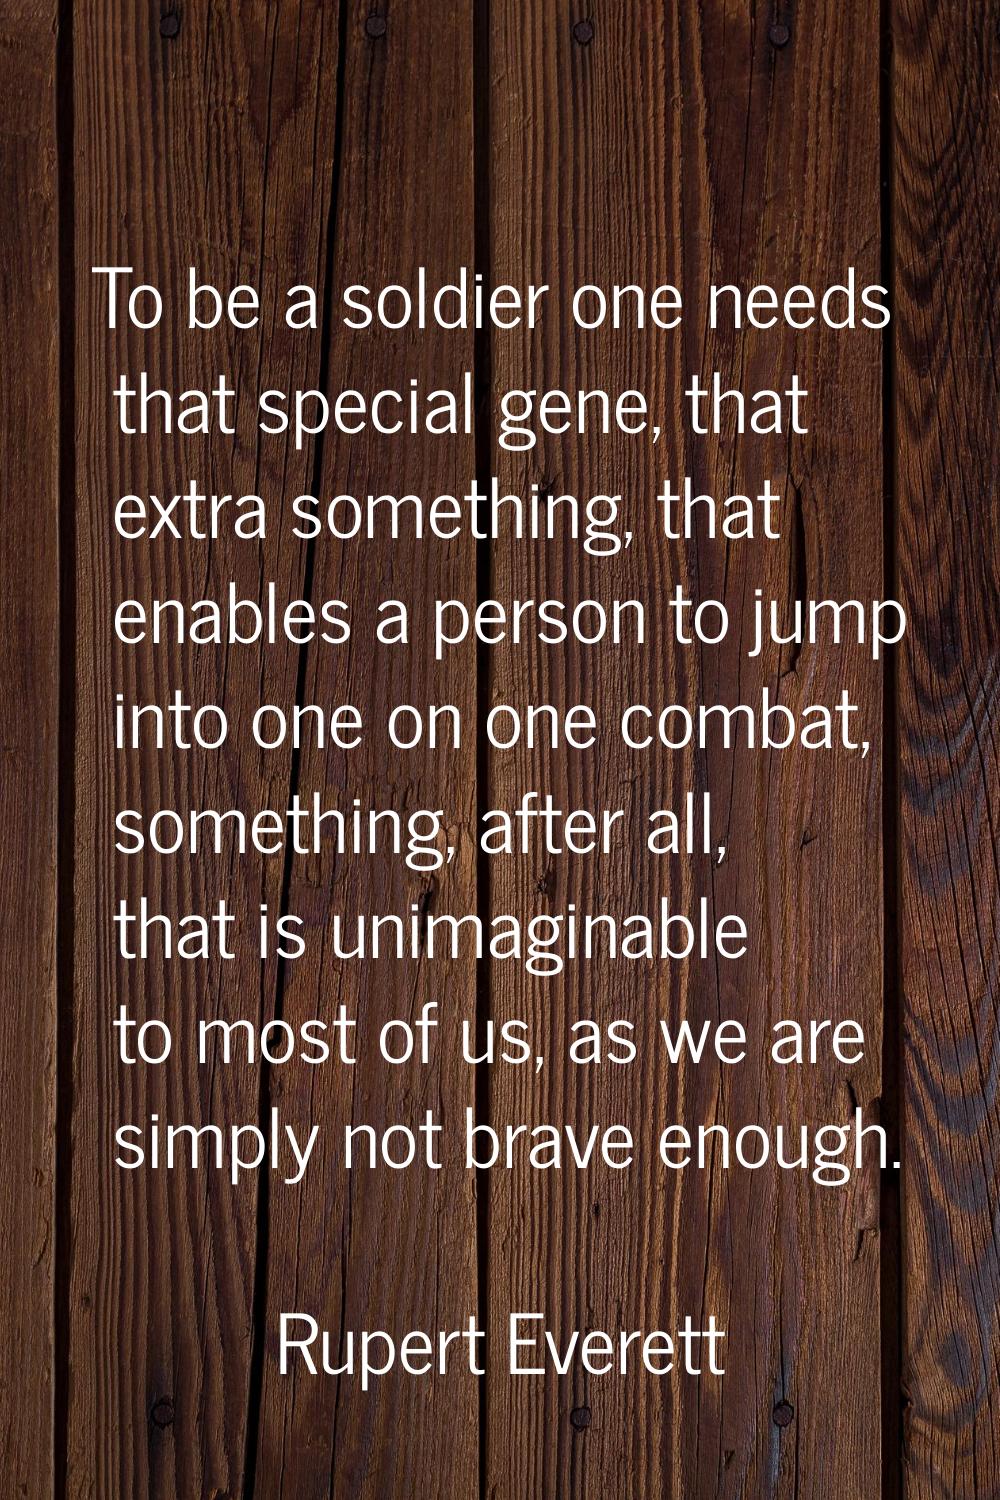 To be a soldier one needs that special gene, that extra something, that enables a person to jump in